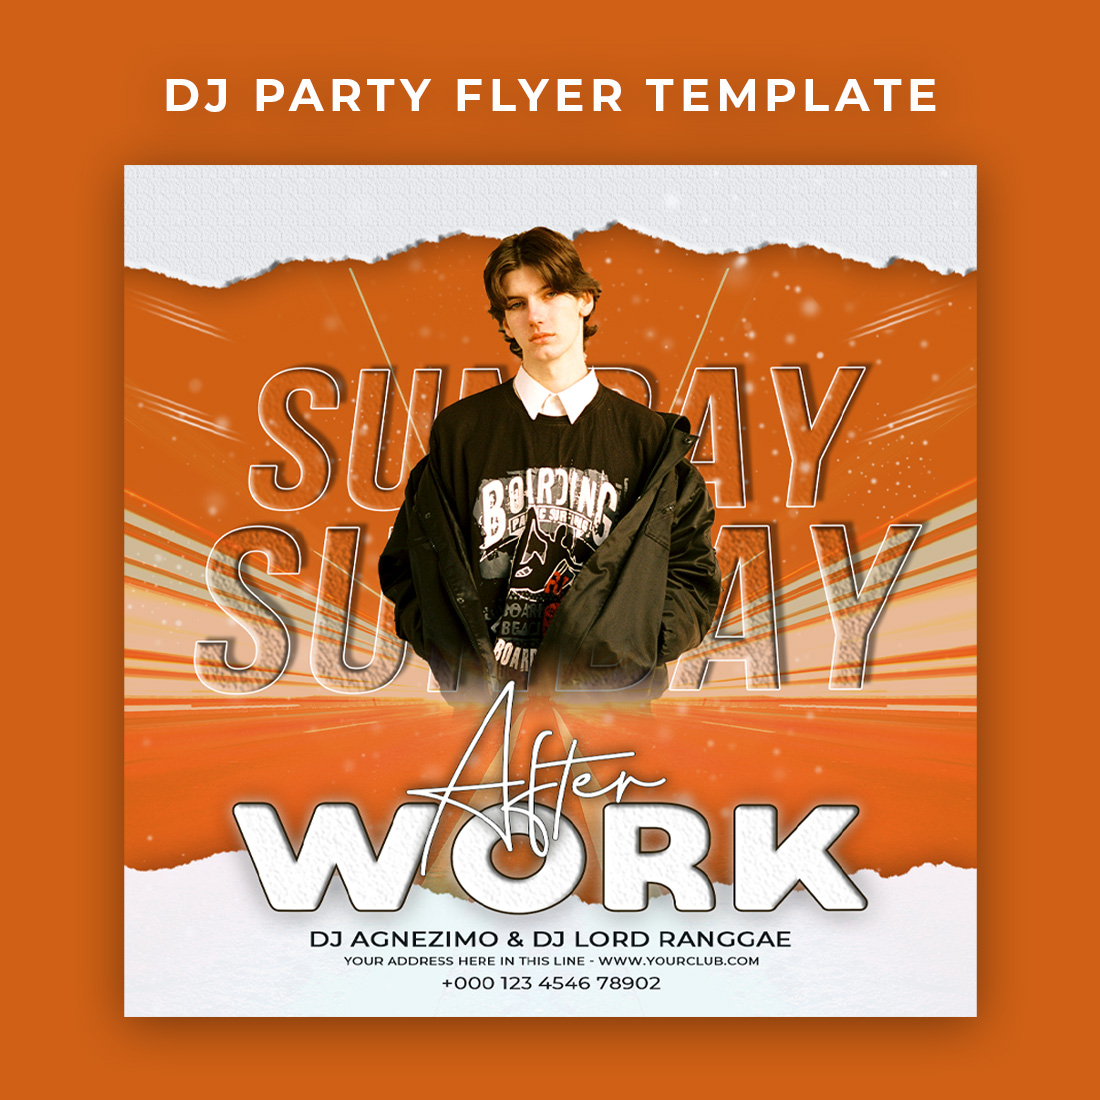 Dj party flyer template cover image.